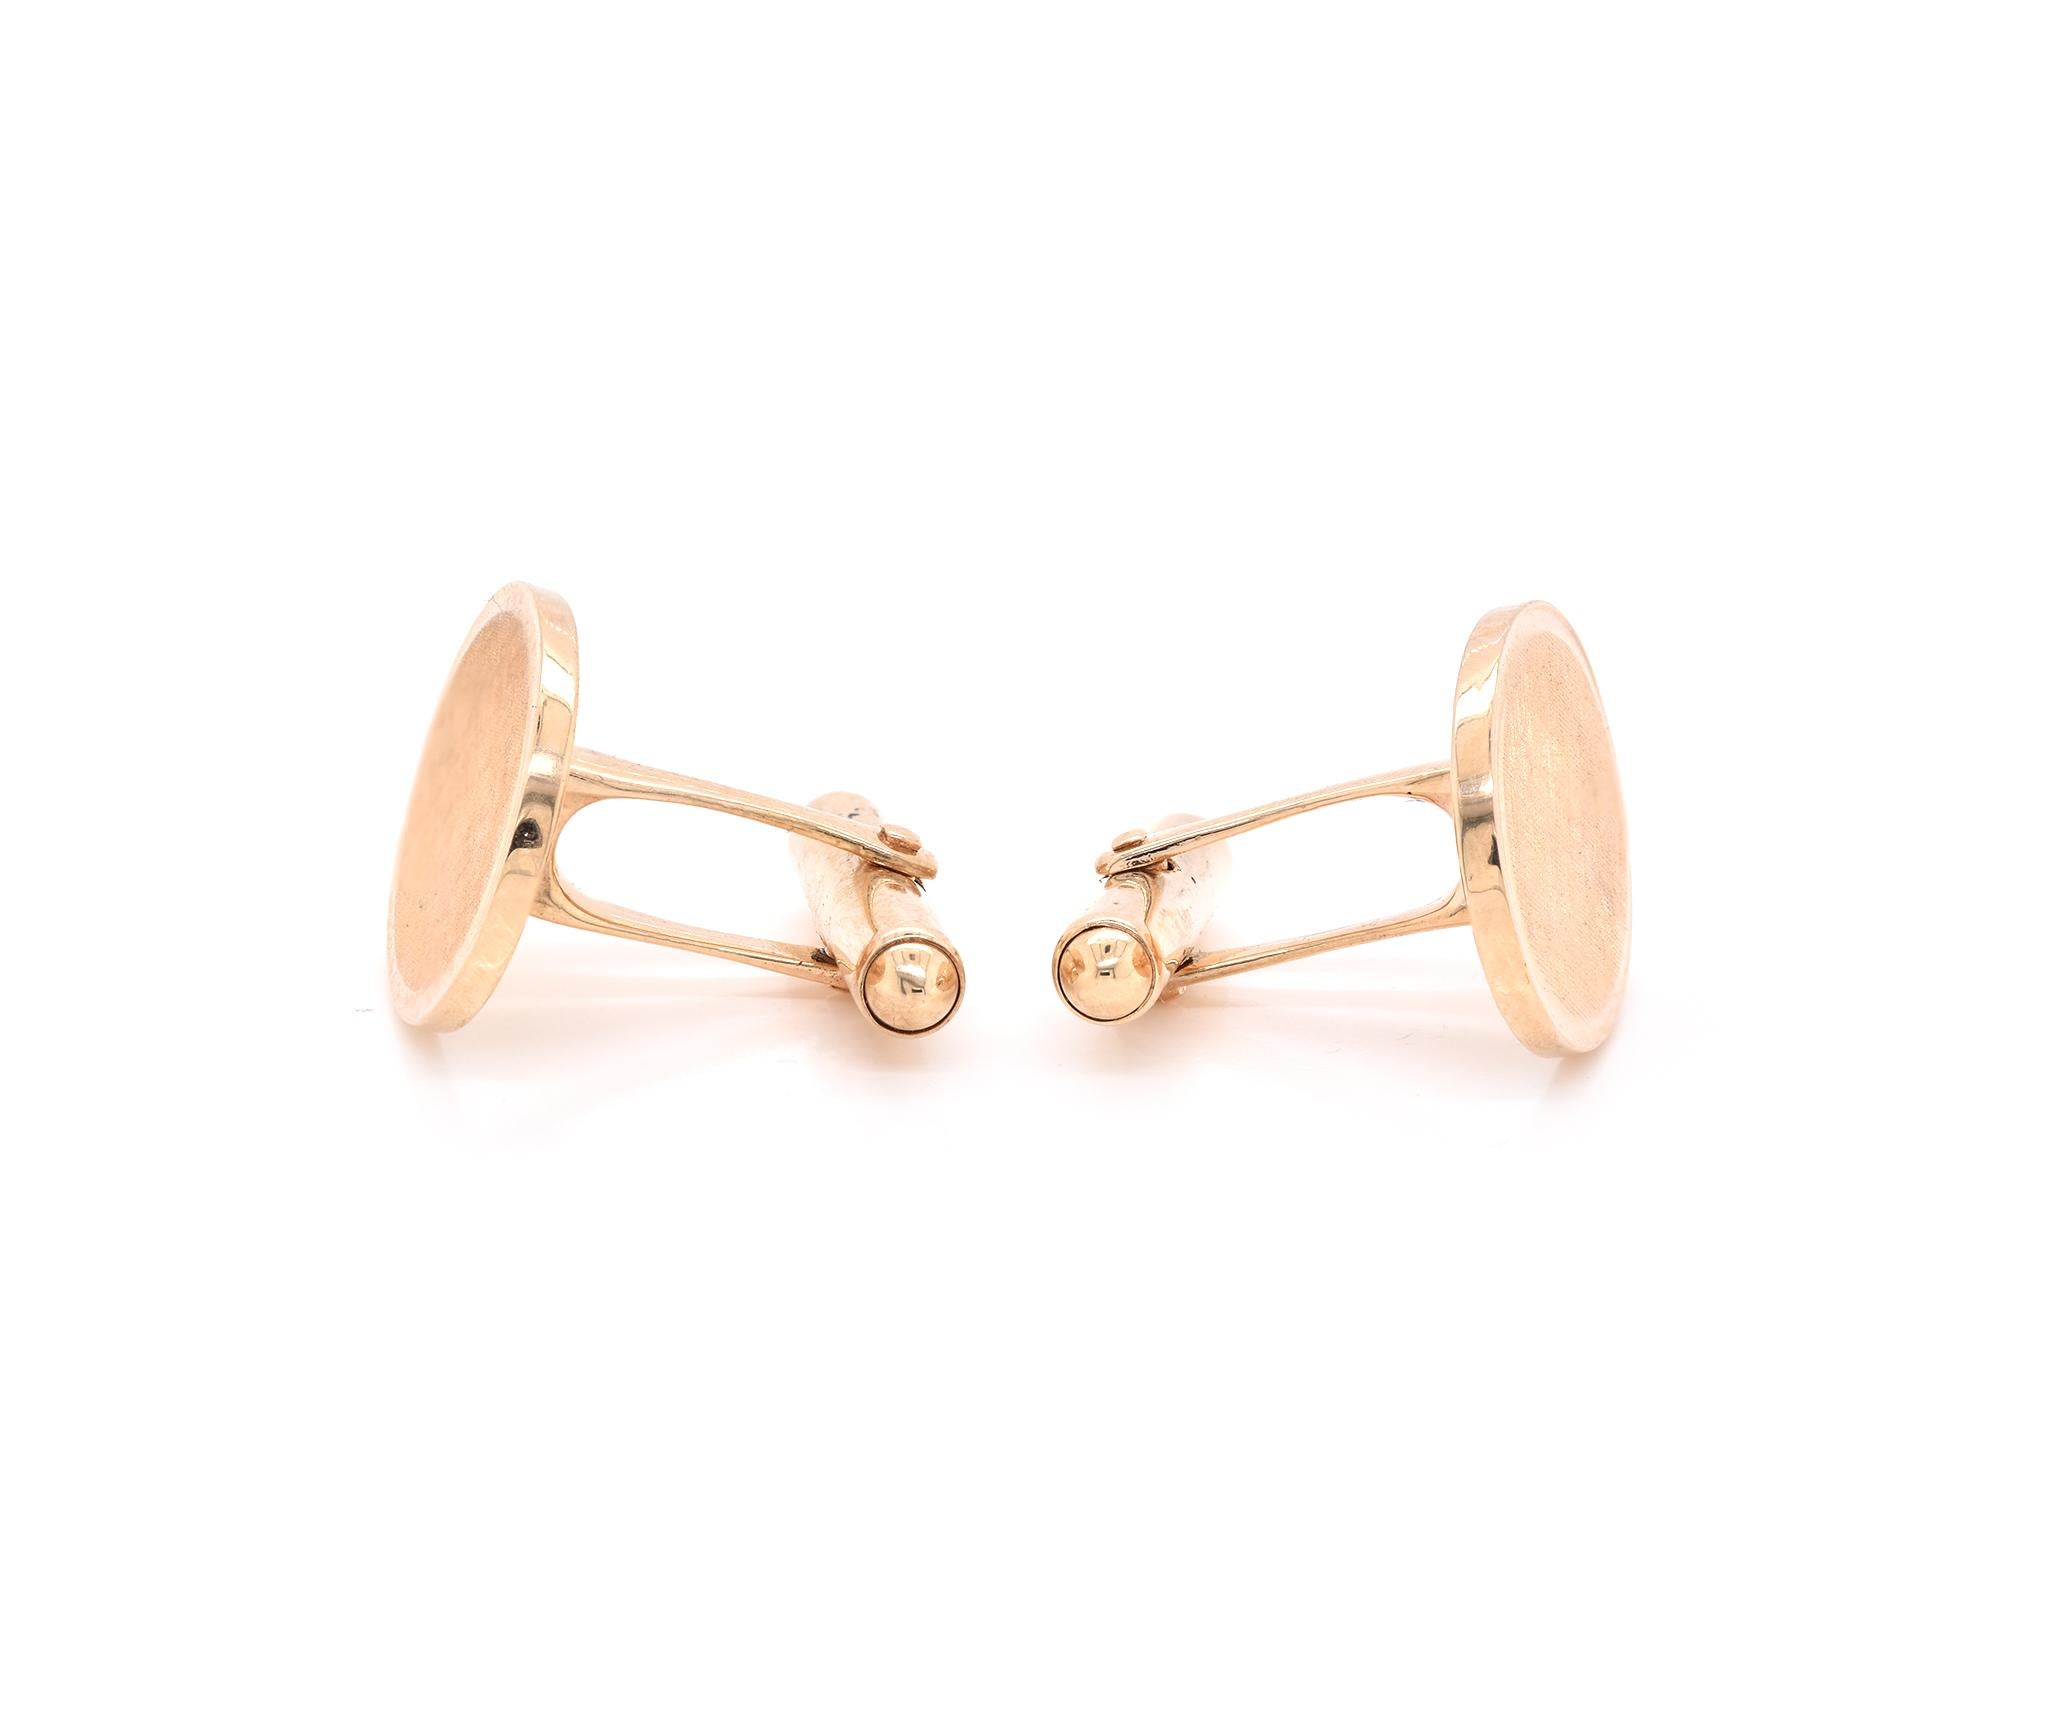 Designer: Tiffany & Co. 
Material: 14K yellow gold
Dimensions: cufflinks measure 20.75 X 16mm
Weight: 15.32 grams
